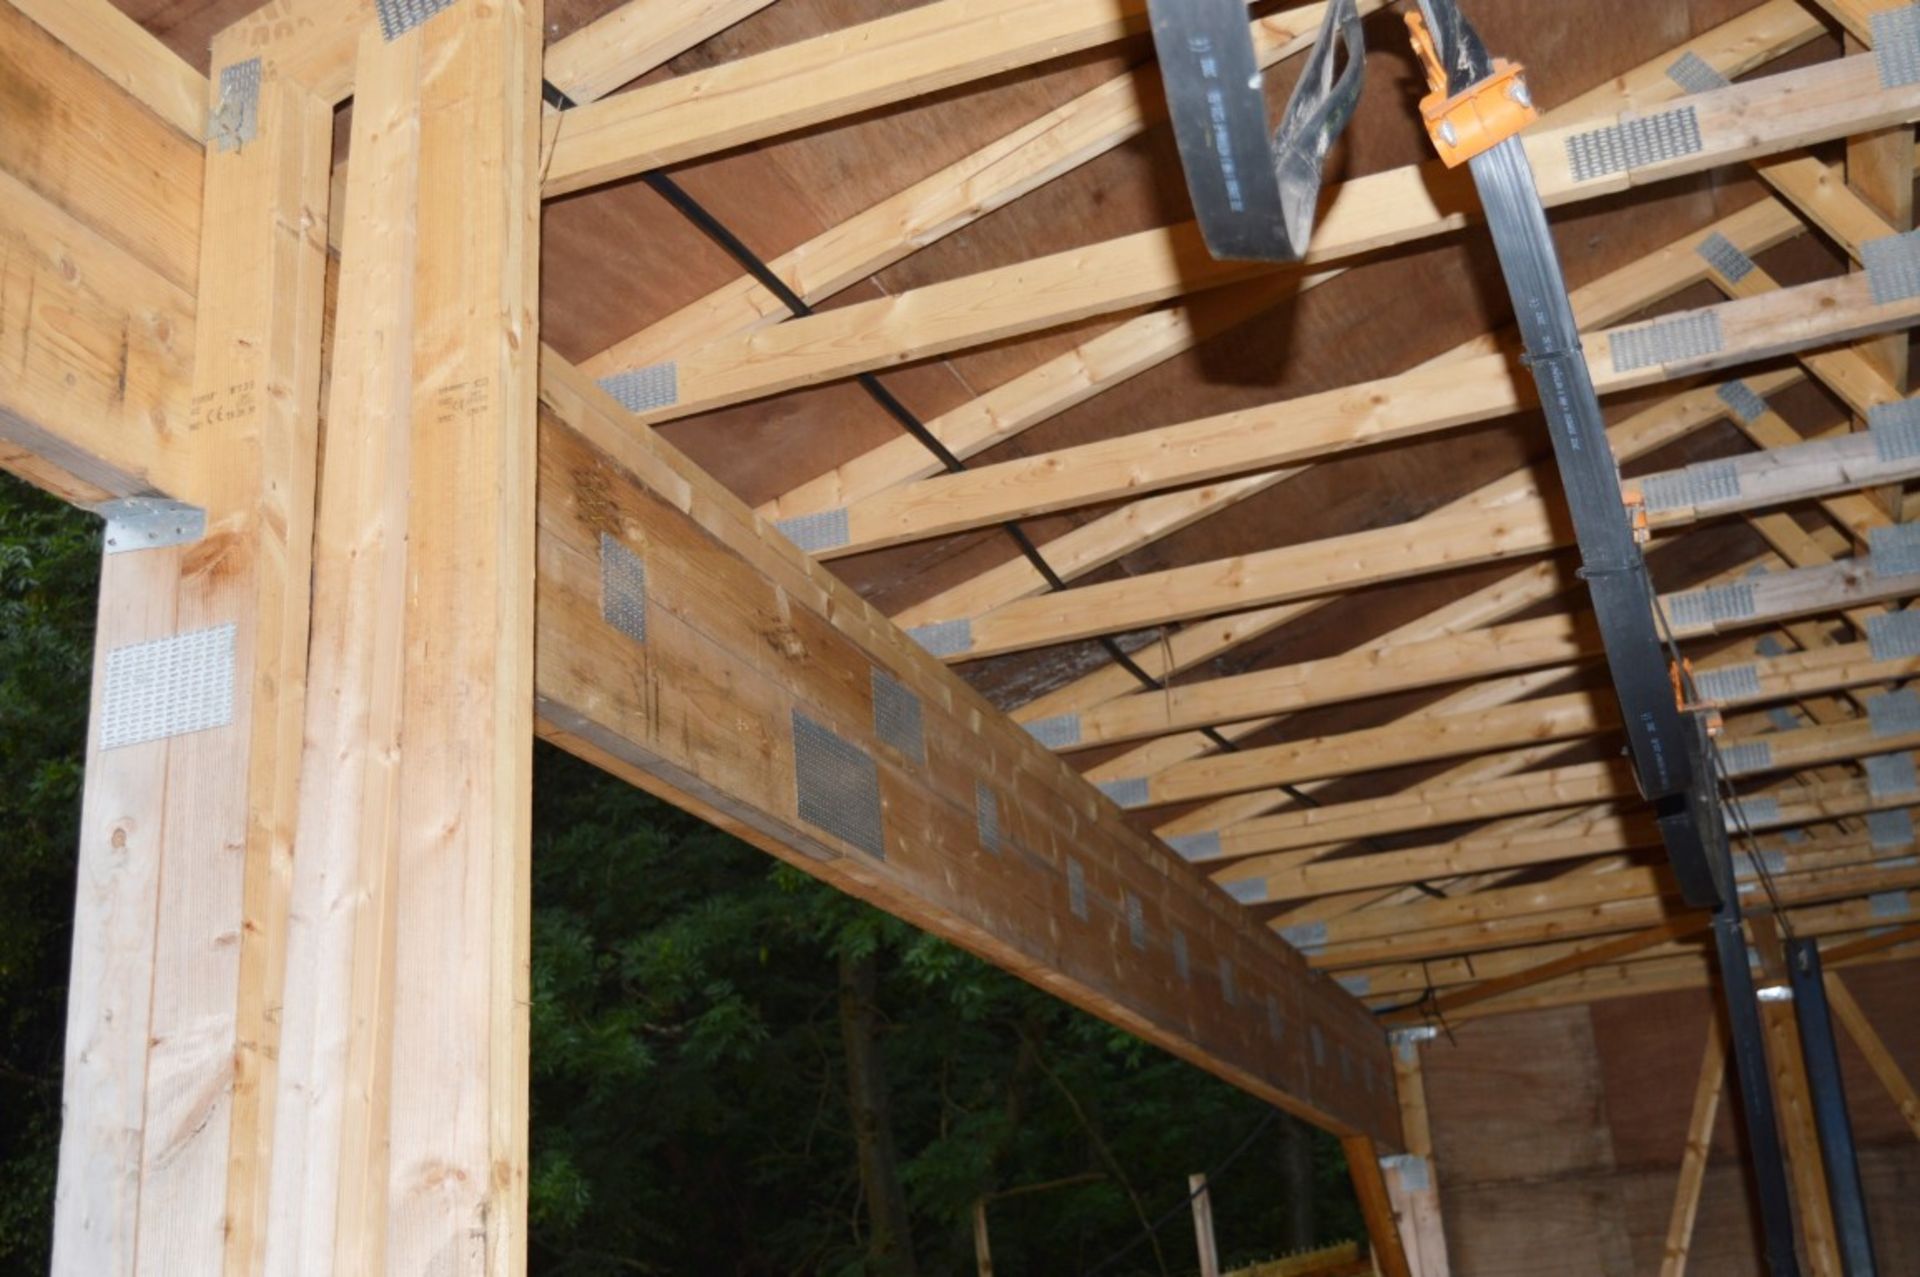 1 x Large Purpose Built Canopy Shed - Super Chord Purlin Construction With OSB Felted Roof - - Image 8 of 9